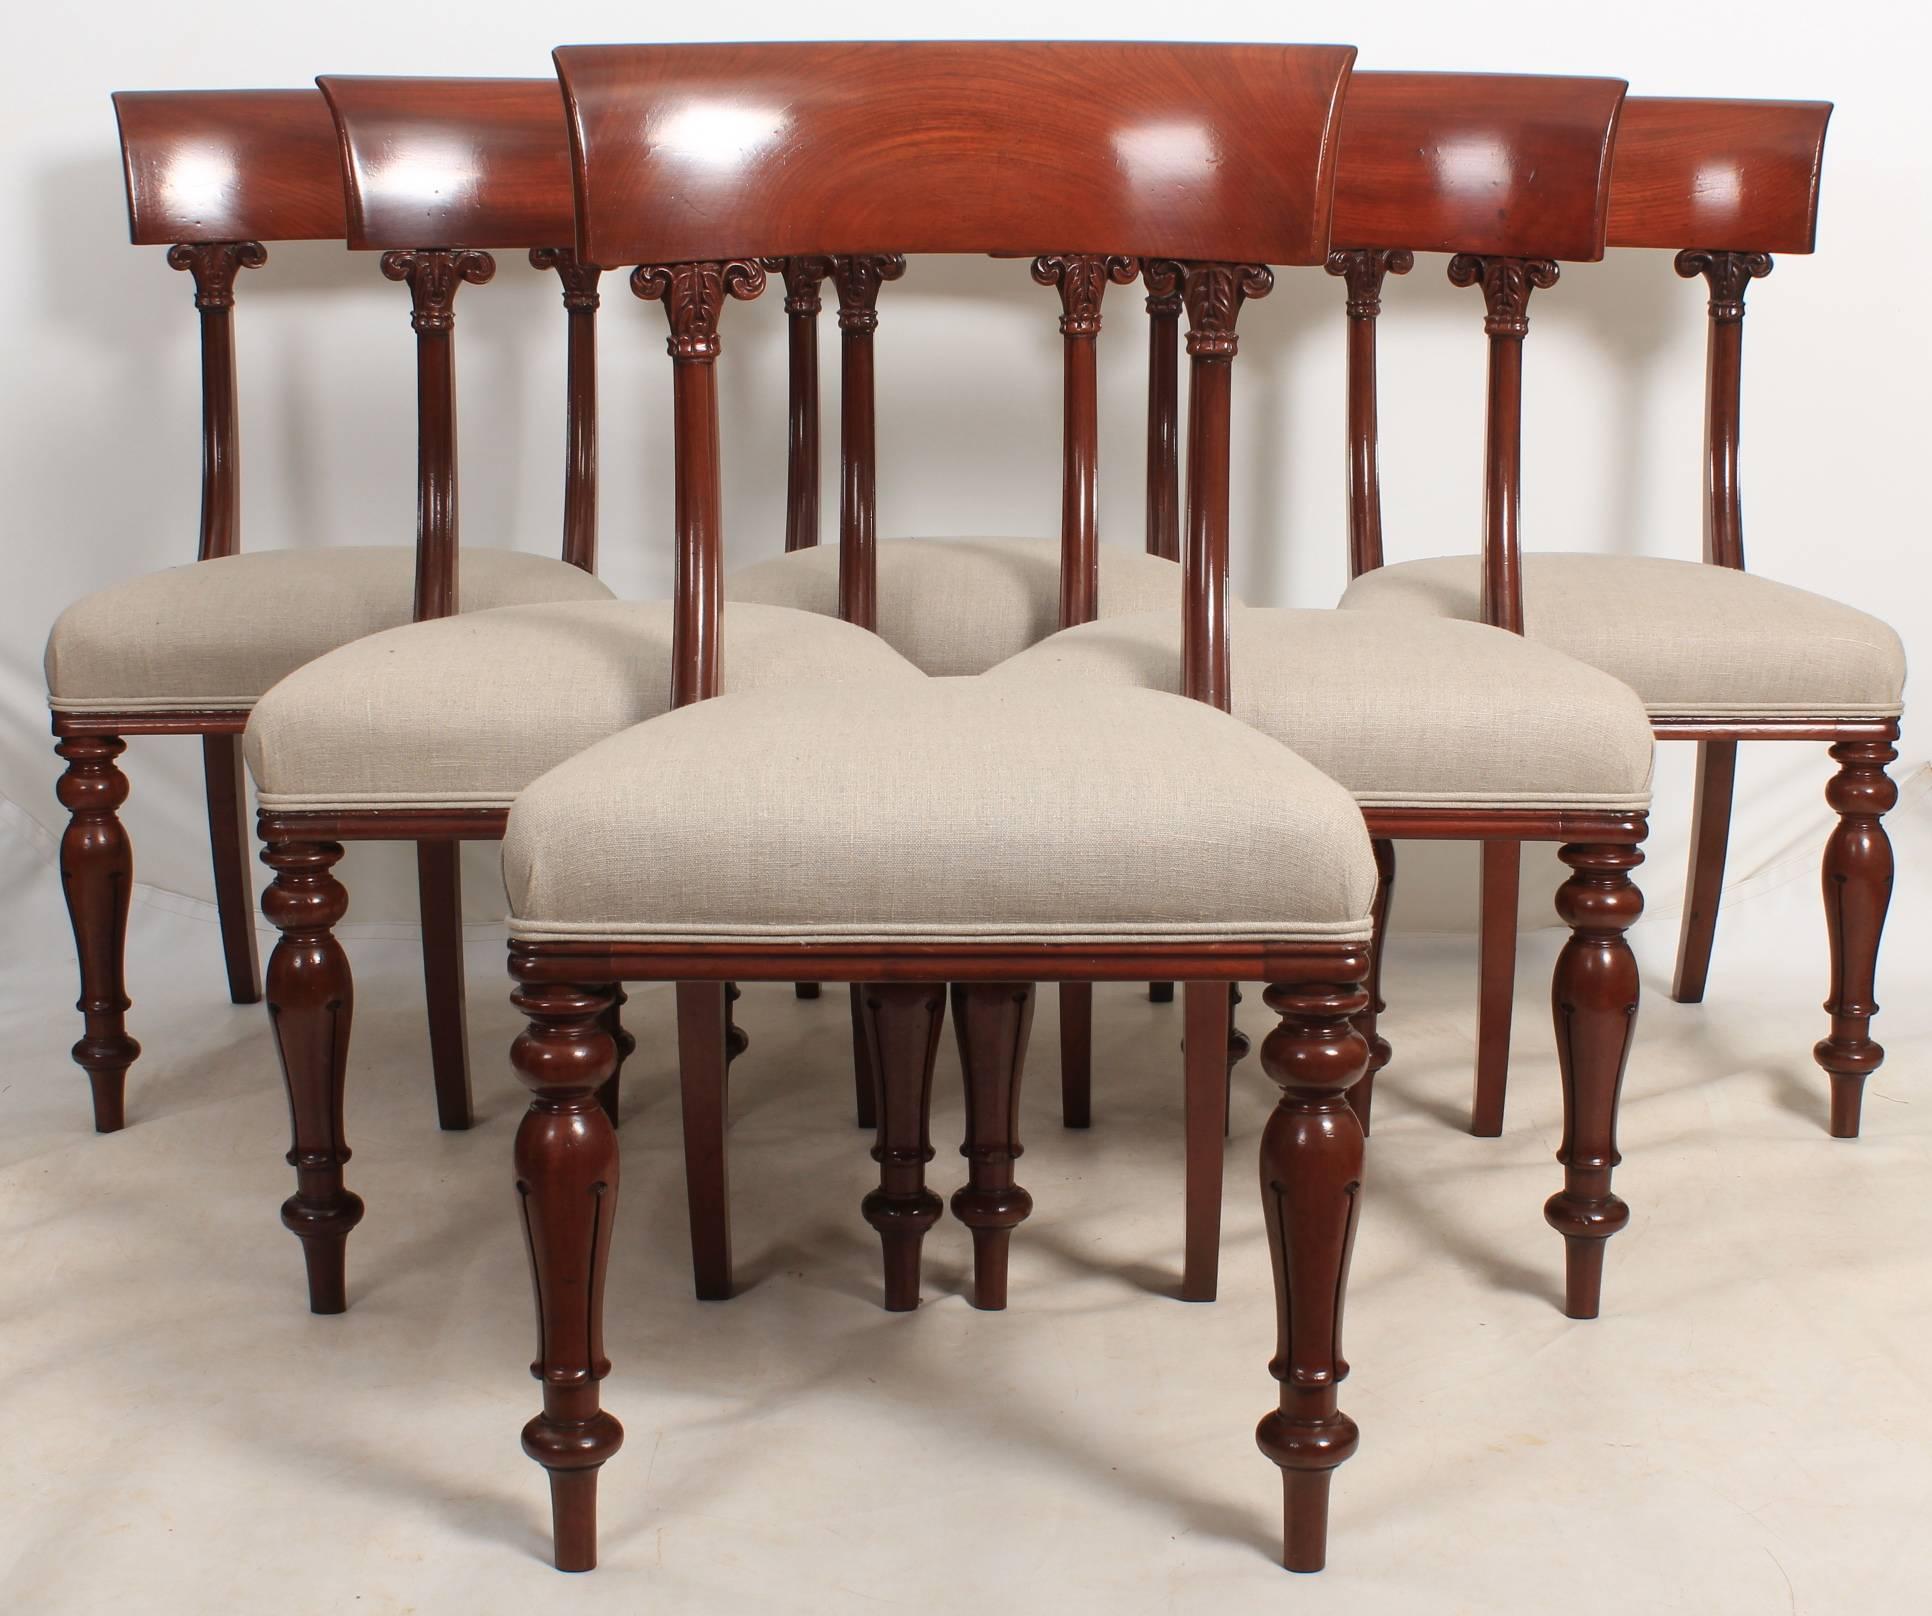 English, circa 1820.
This set of dining chairs are offered in showroom condition.
Boasting beautiful Cuban mahogany bar backs, with newly upholstered seats in a neutral grey linen.
On tulip legs.
A good quality, sturdy and strong set of chairs